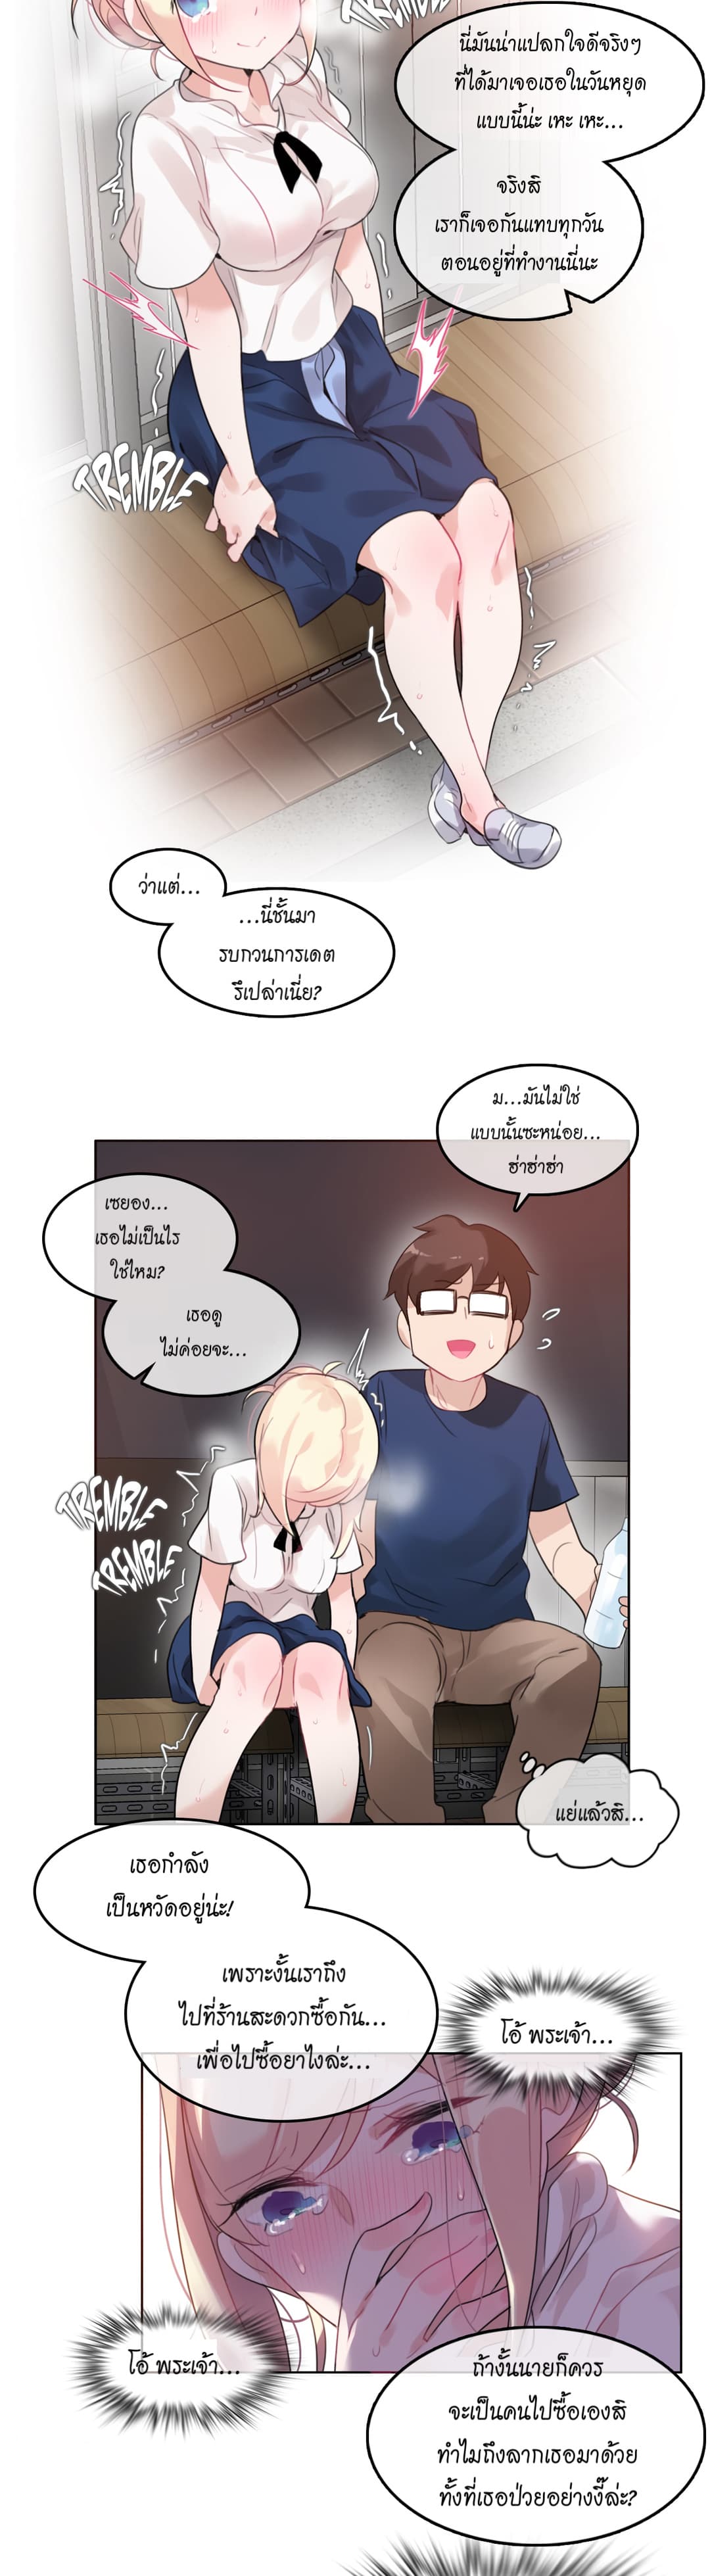 A Pervert’s Daily Life 35 (17)